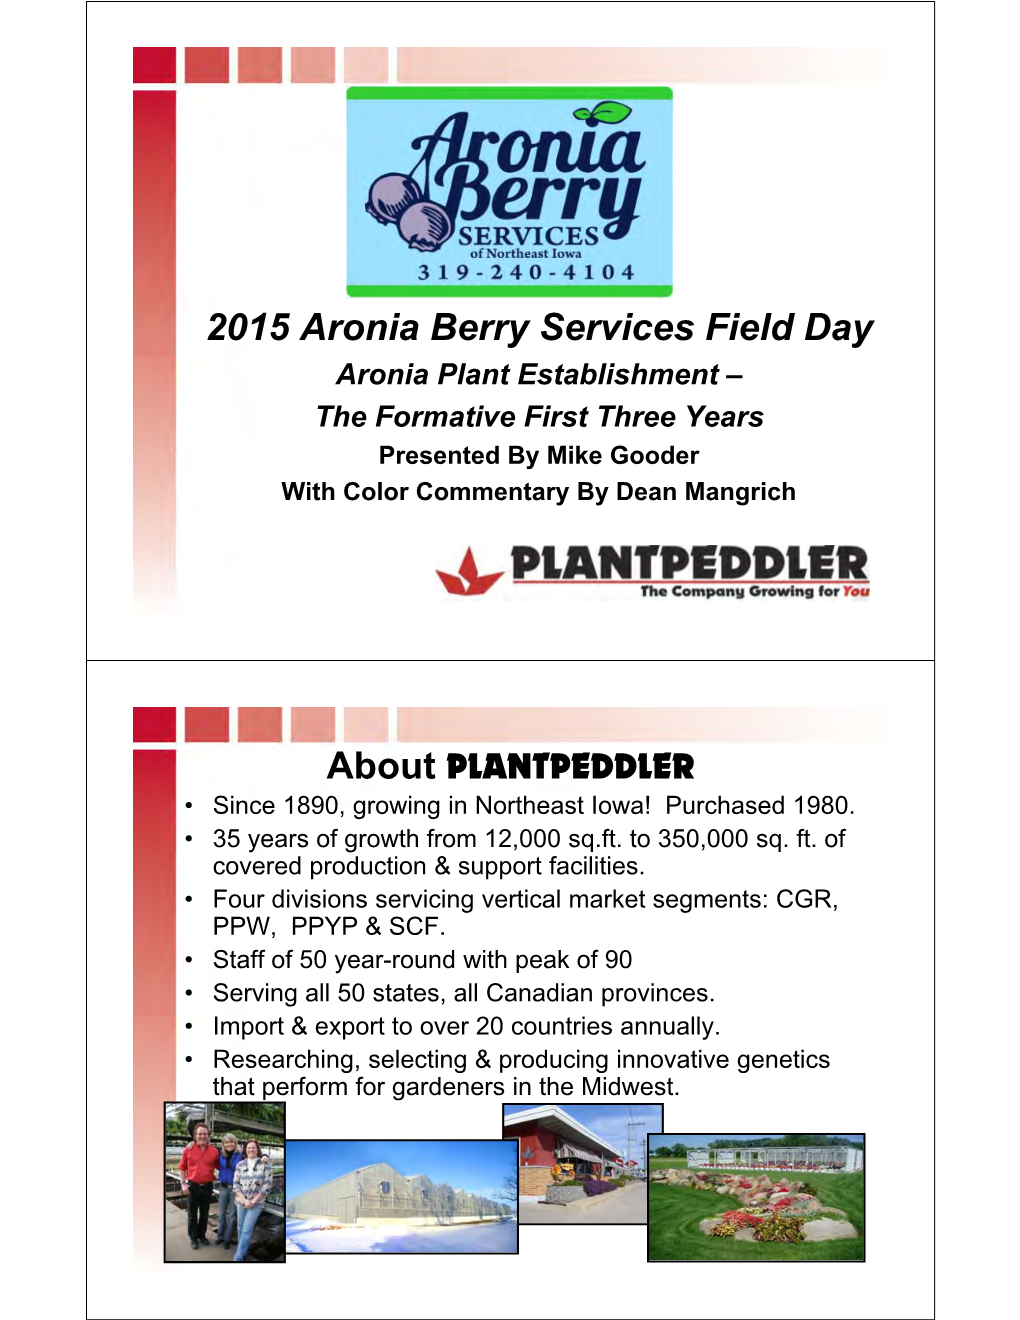 Information on the Aronia Berry